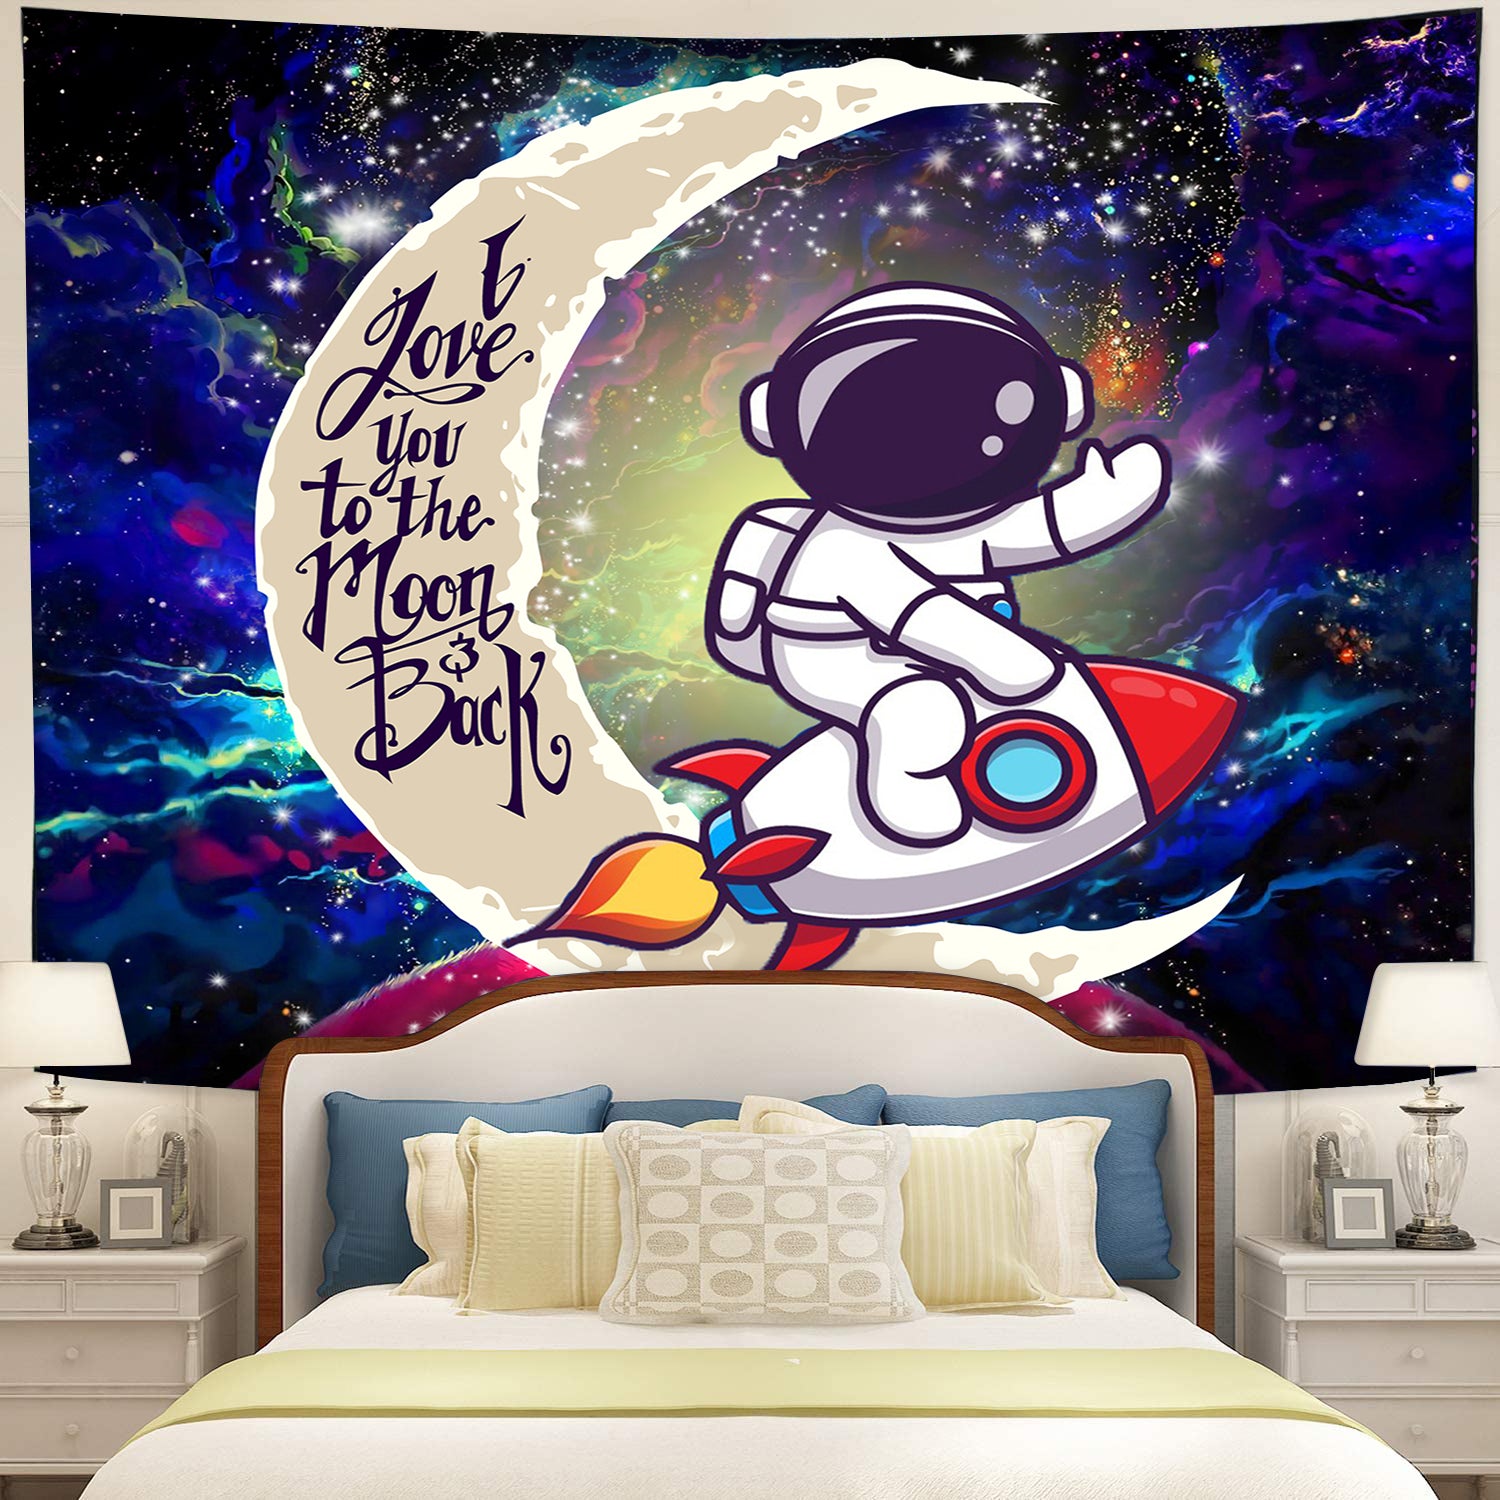 Astronaut Chibi Moon And Back Galaxy Tapestry Room Decor